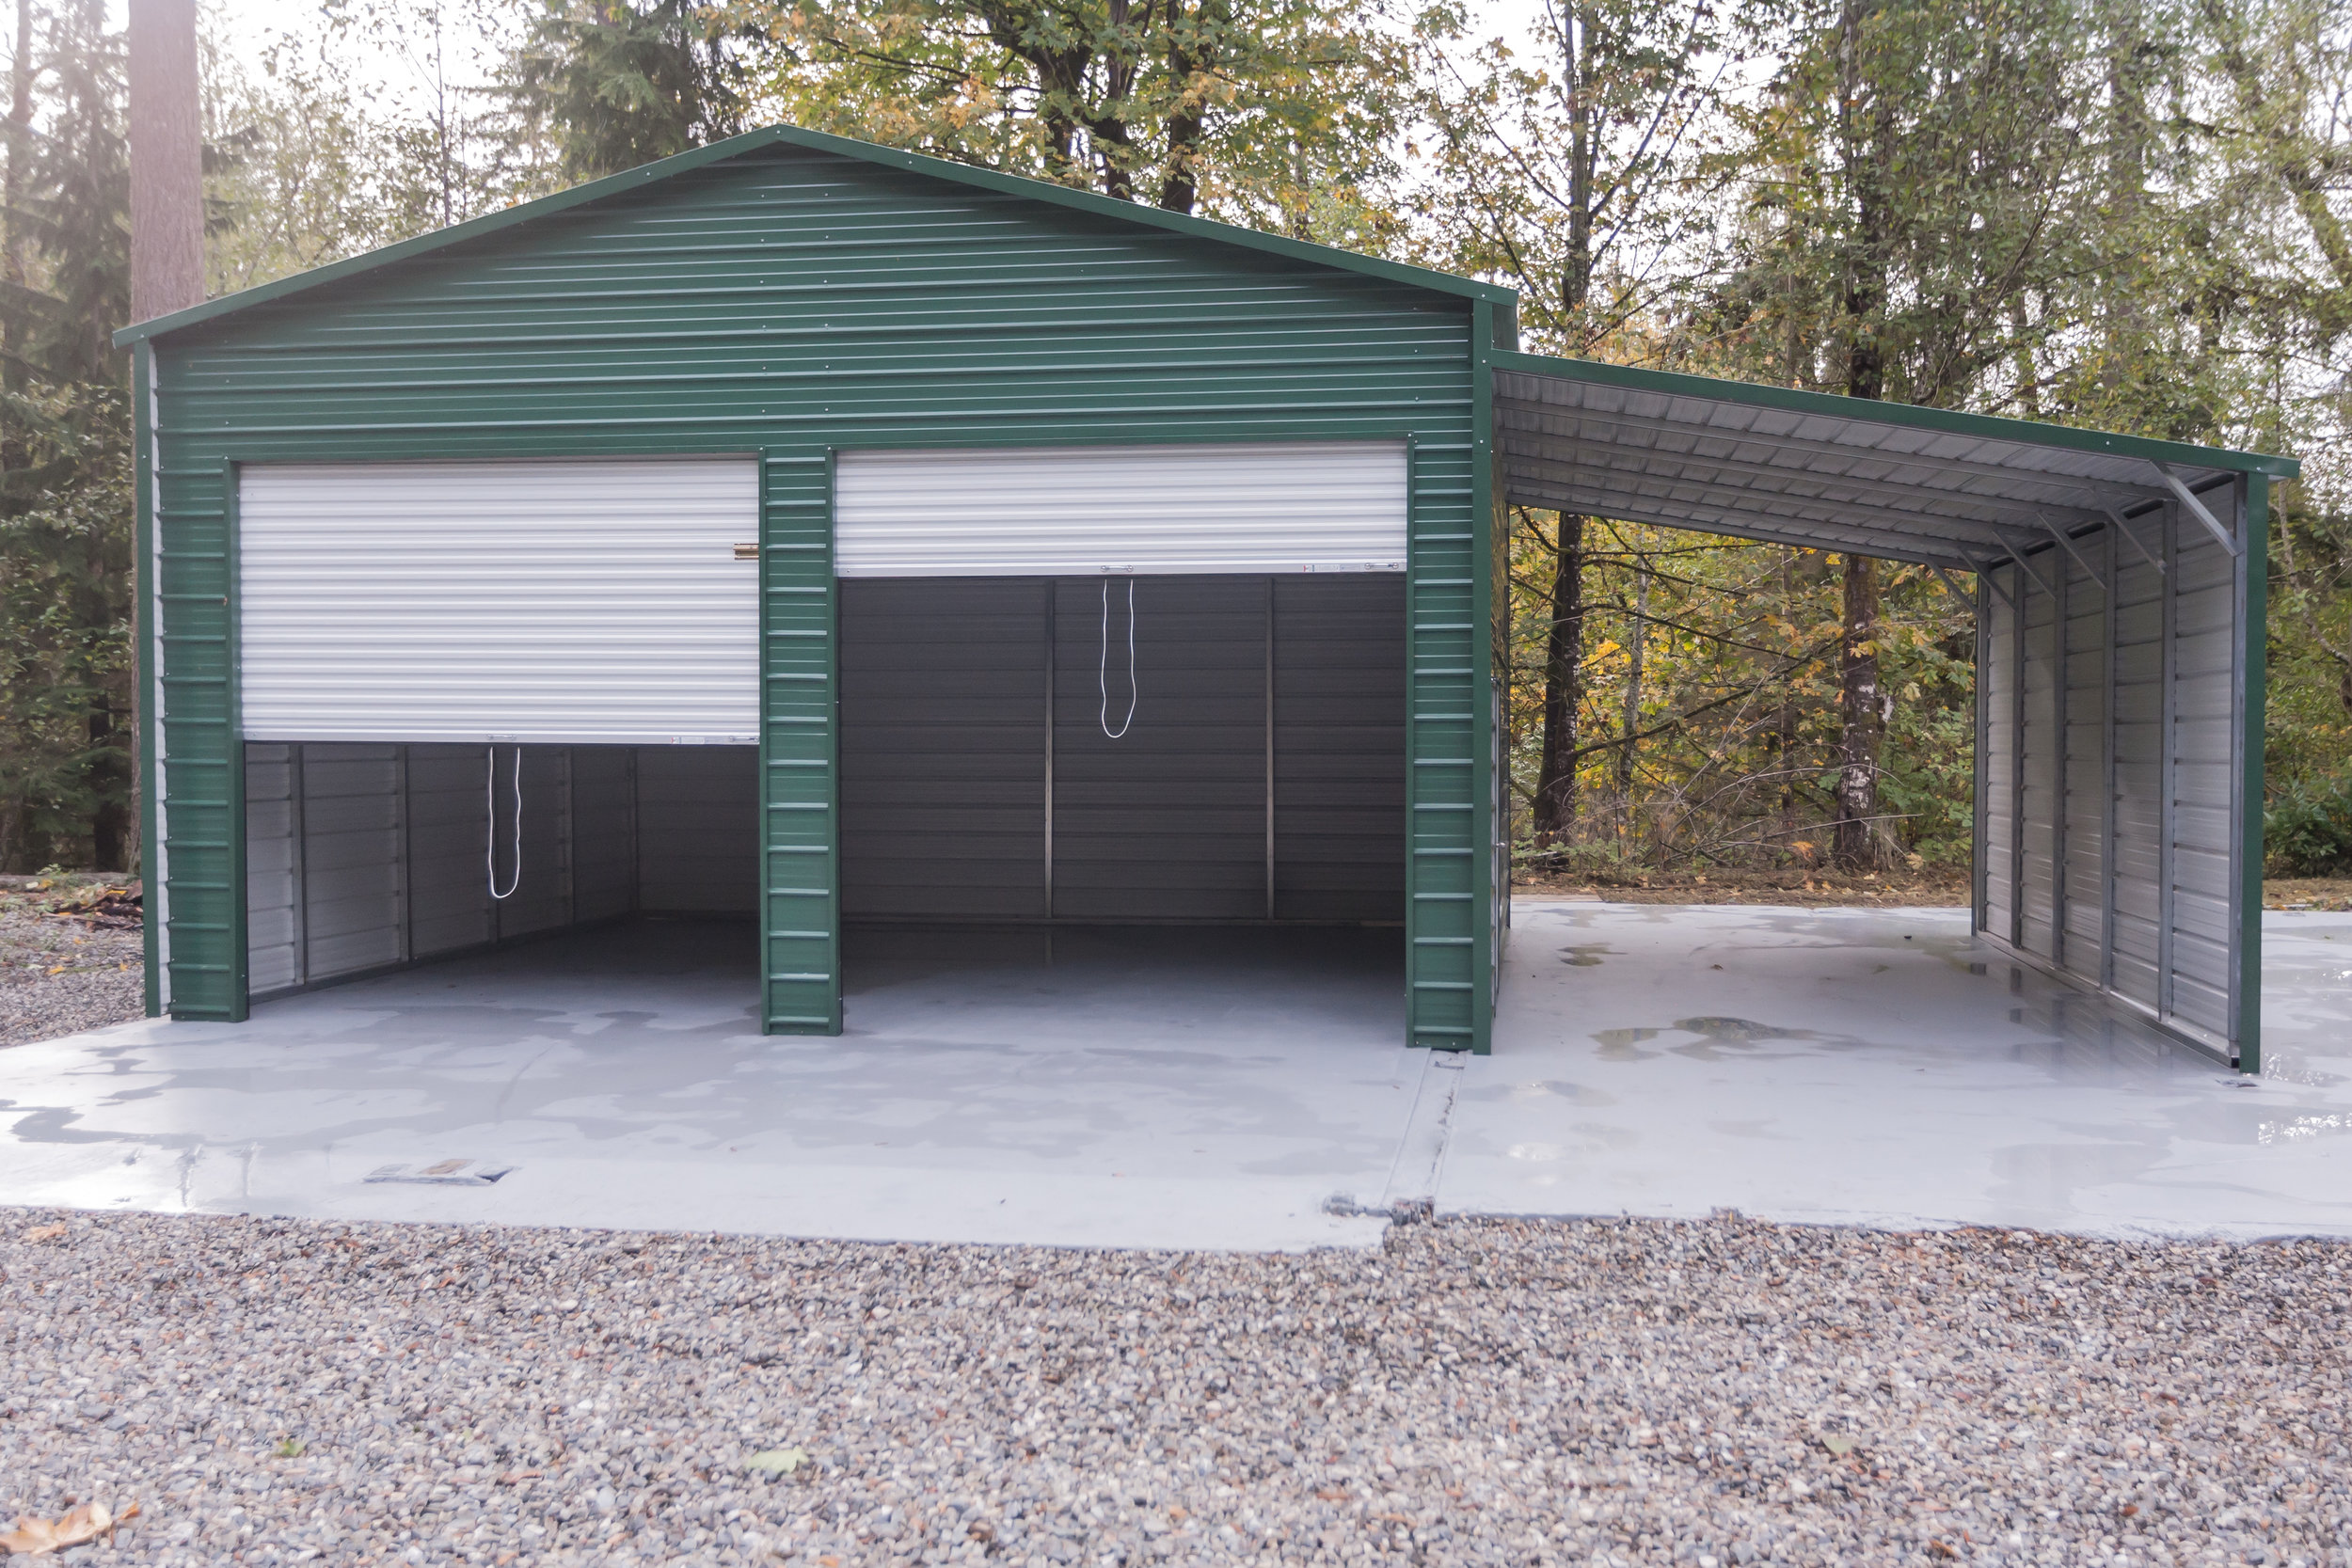  Newly built 2-car garage with overhang. RV parking. Shop? Electricity run to area and ready for your hook-ups. 